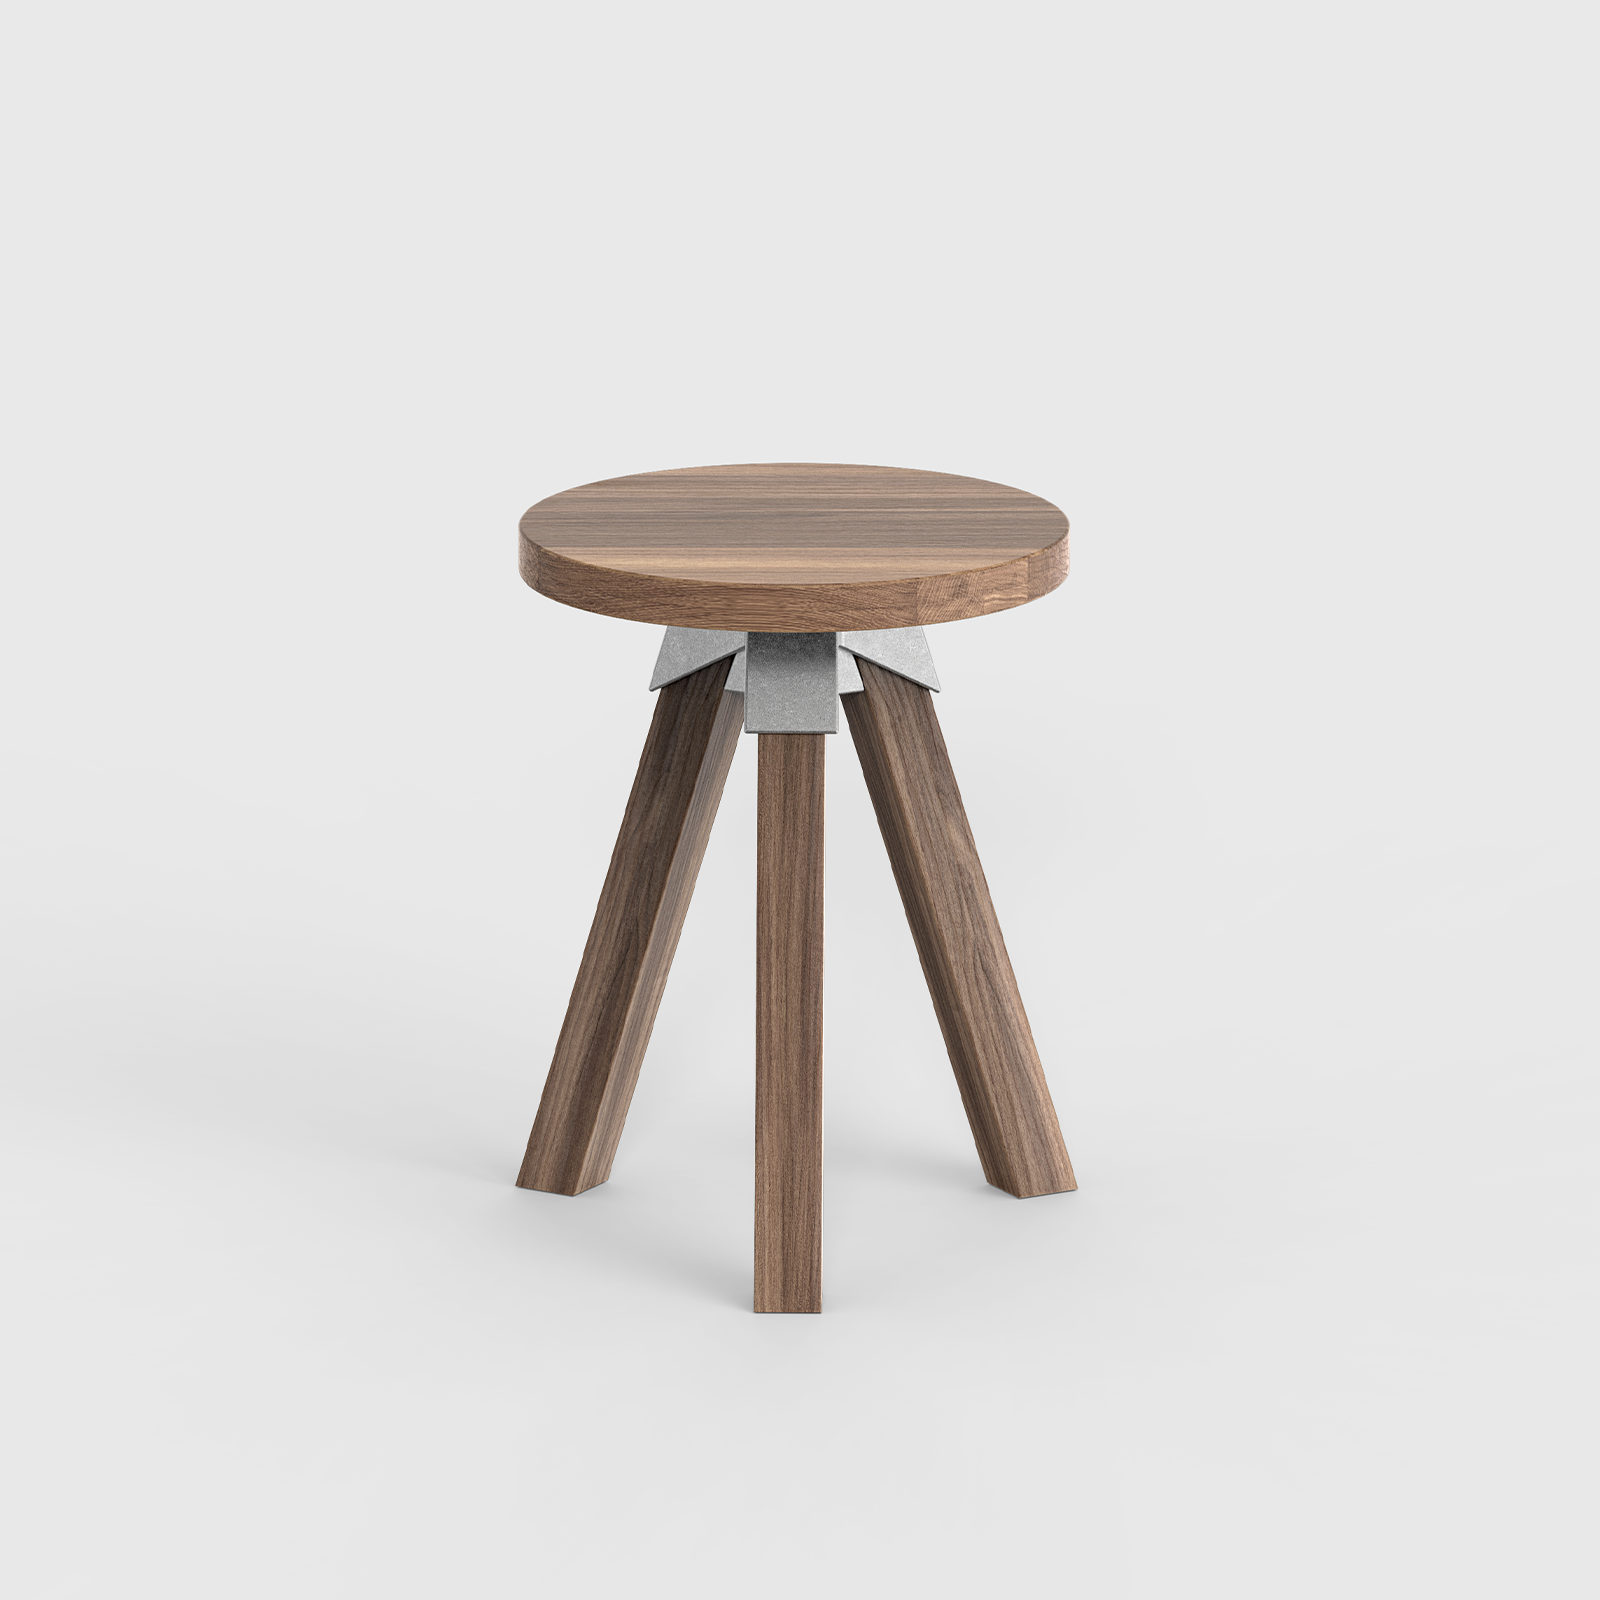 A-joint stool in solid American Walnut with cast aluminium A-joint